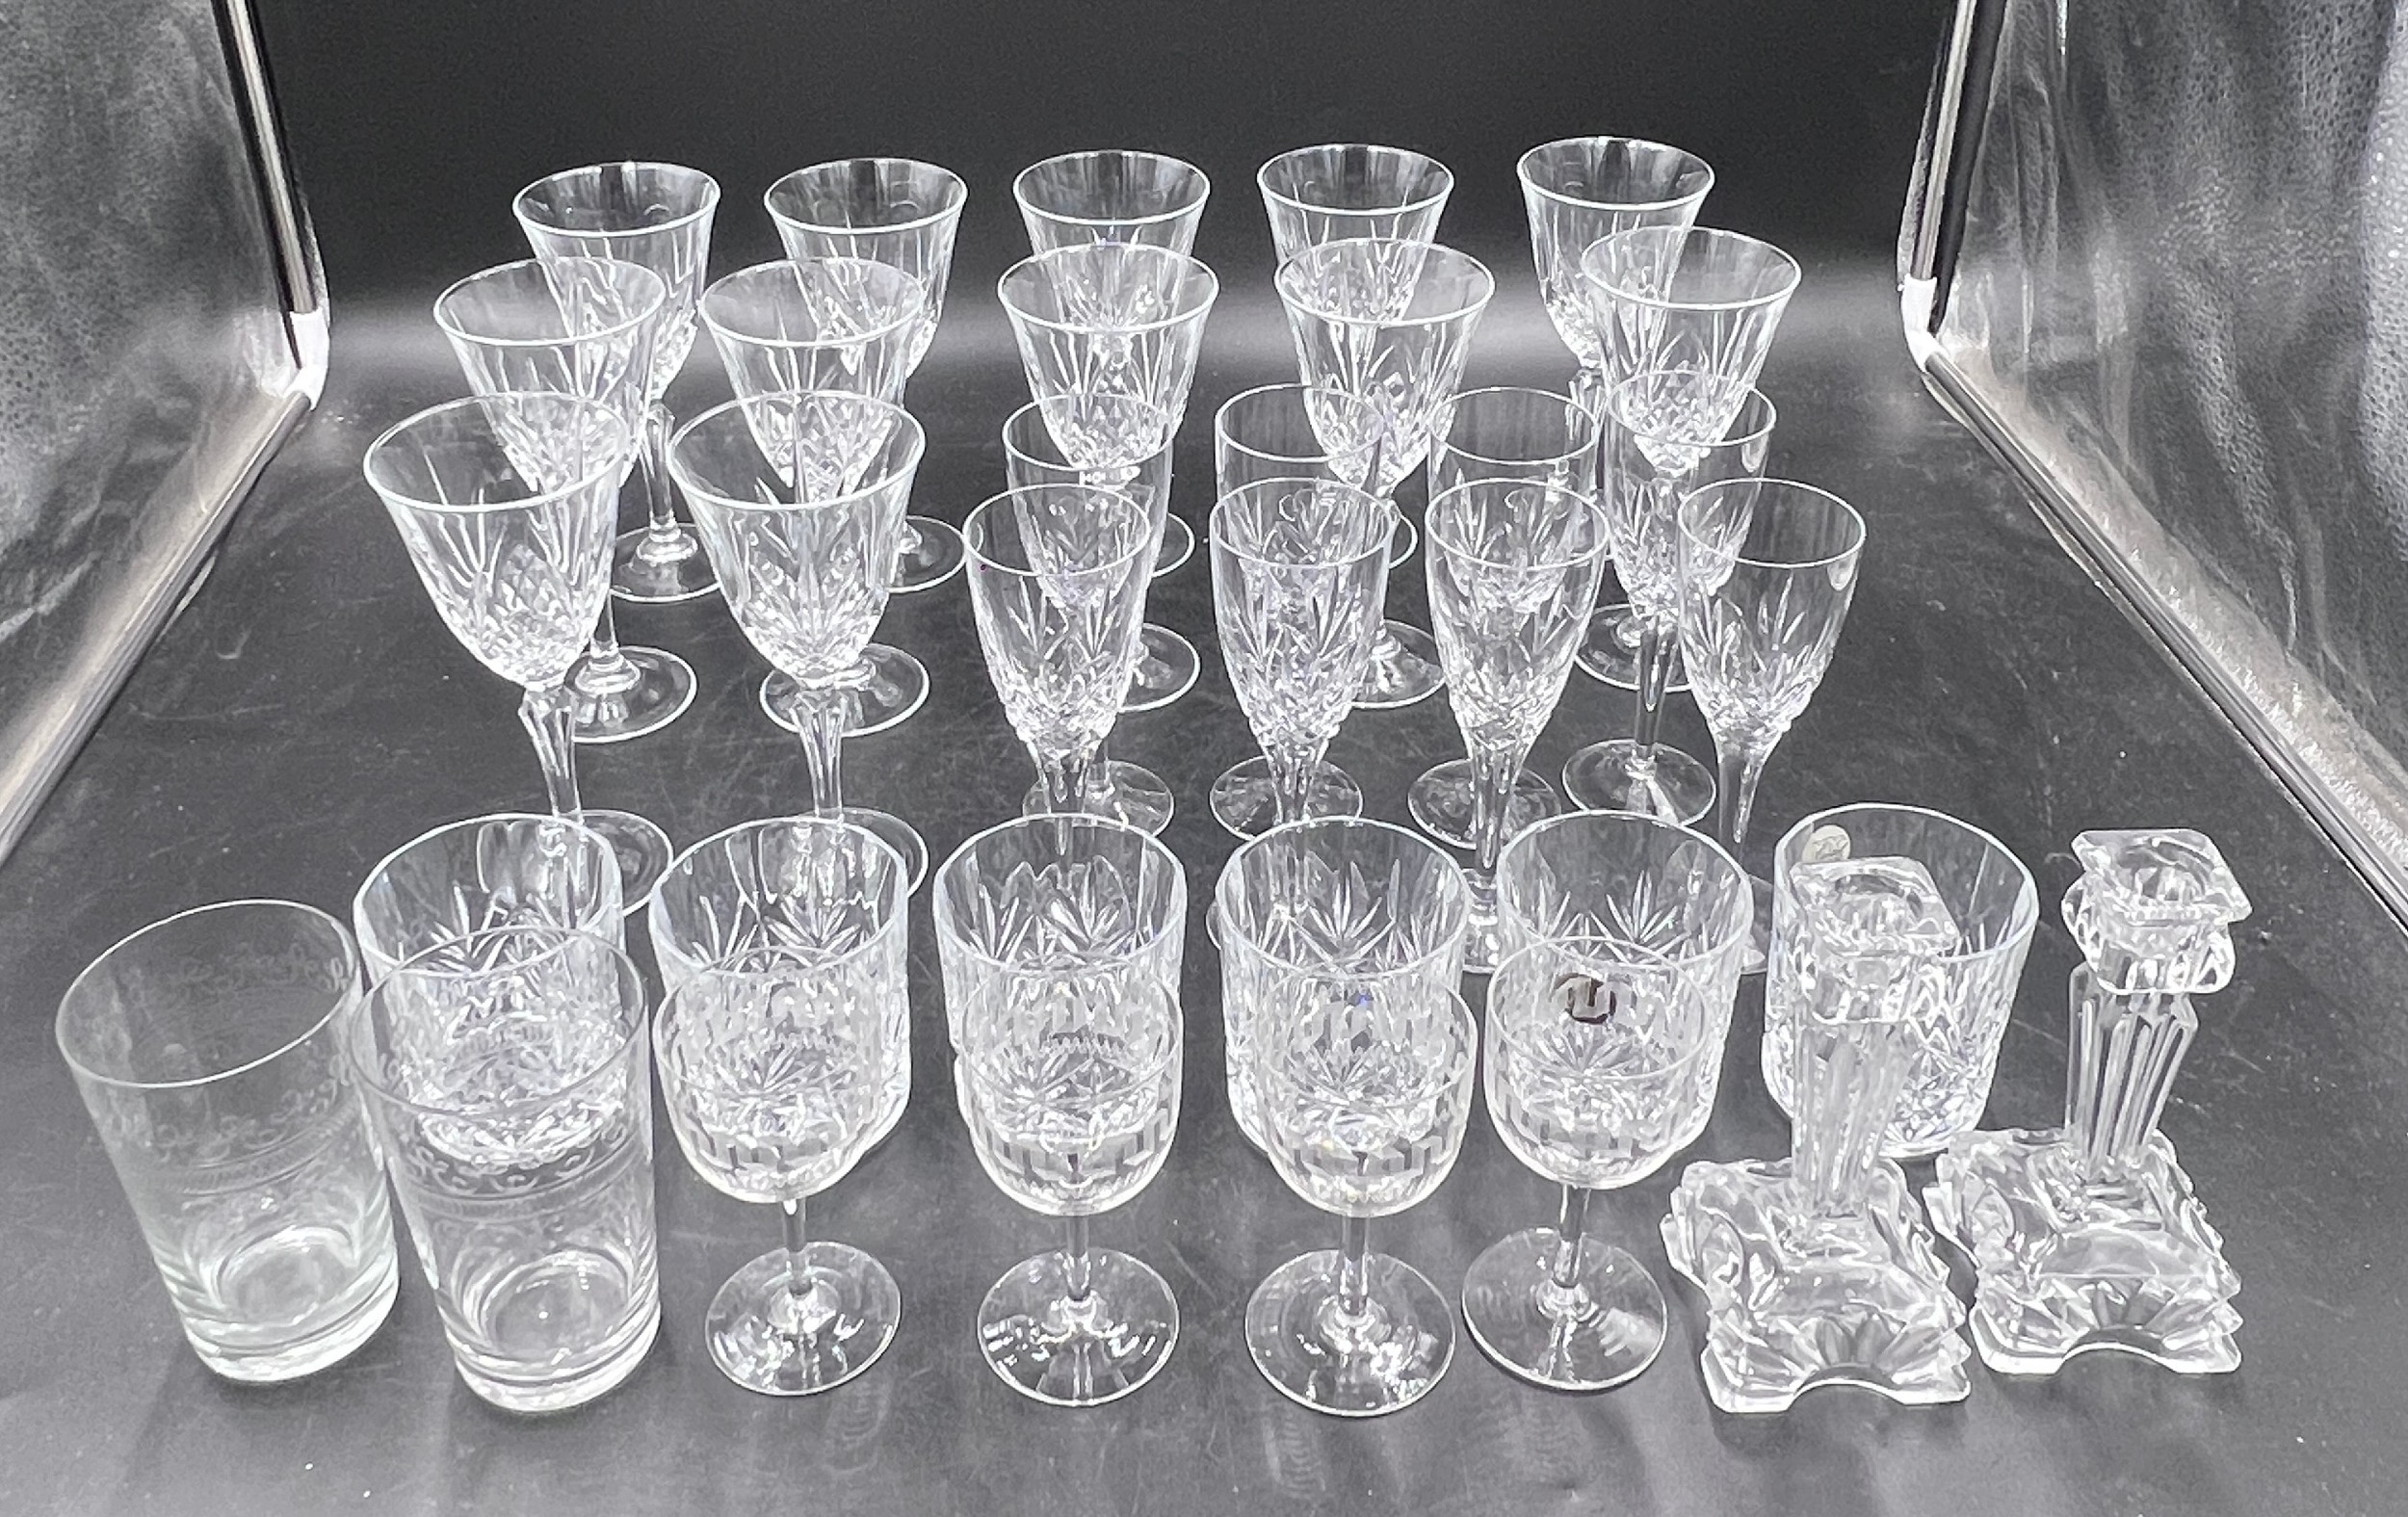 A collection of glass to include champagne flutes, wine glasses, whisky tumblers etc. approx 34